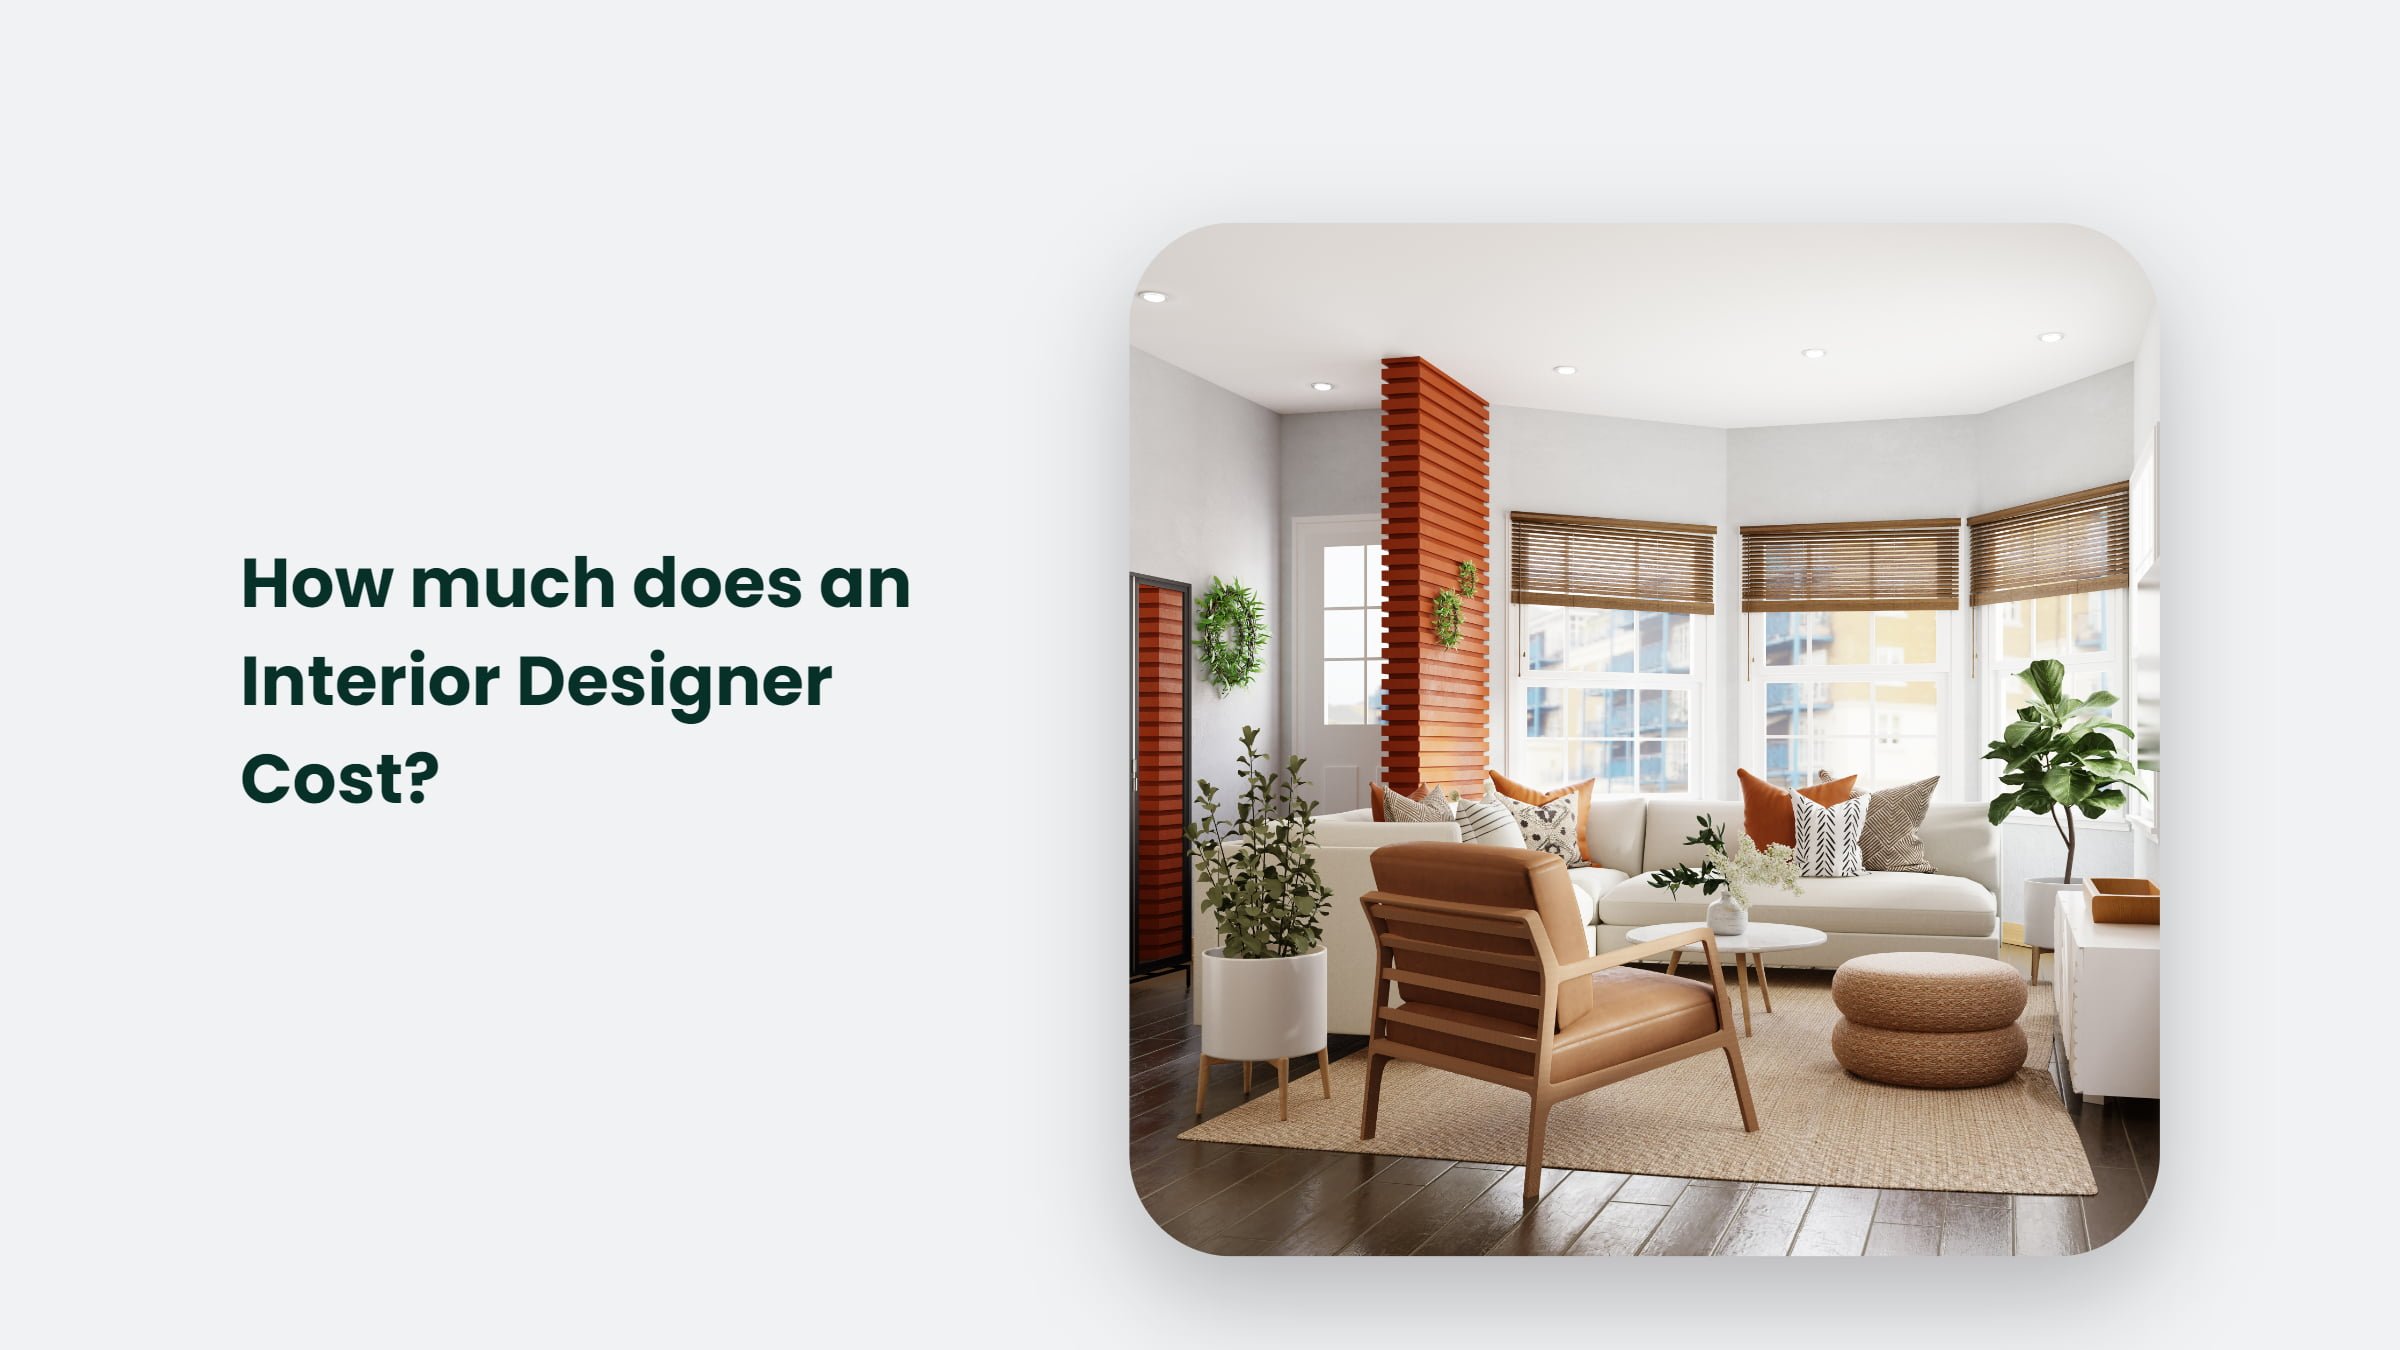 How Much Does An Interior Designer Cost?